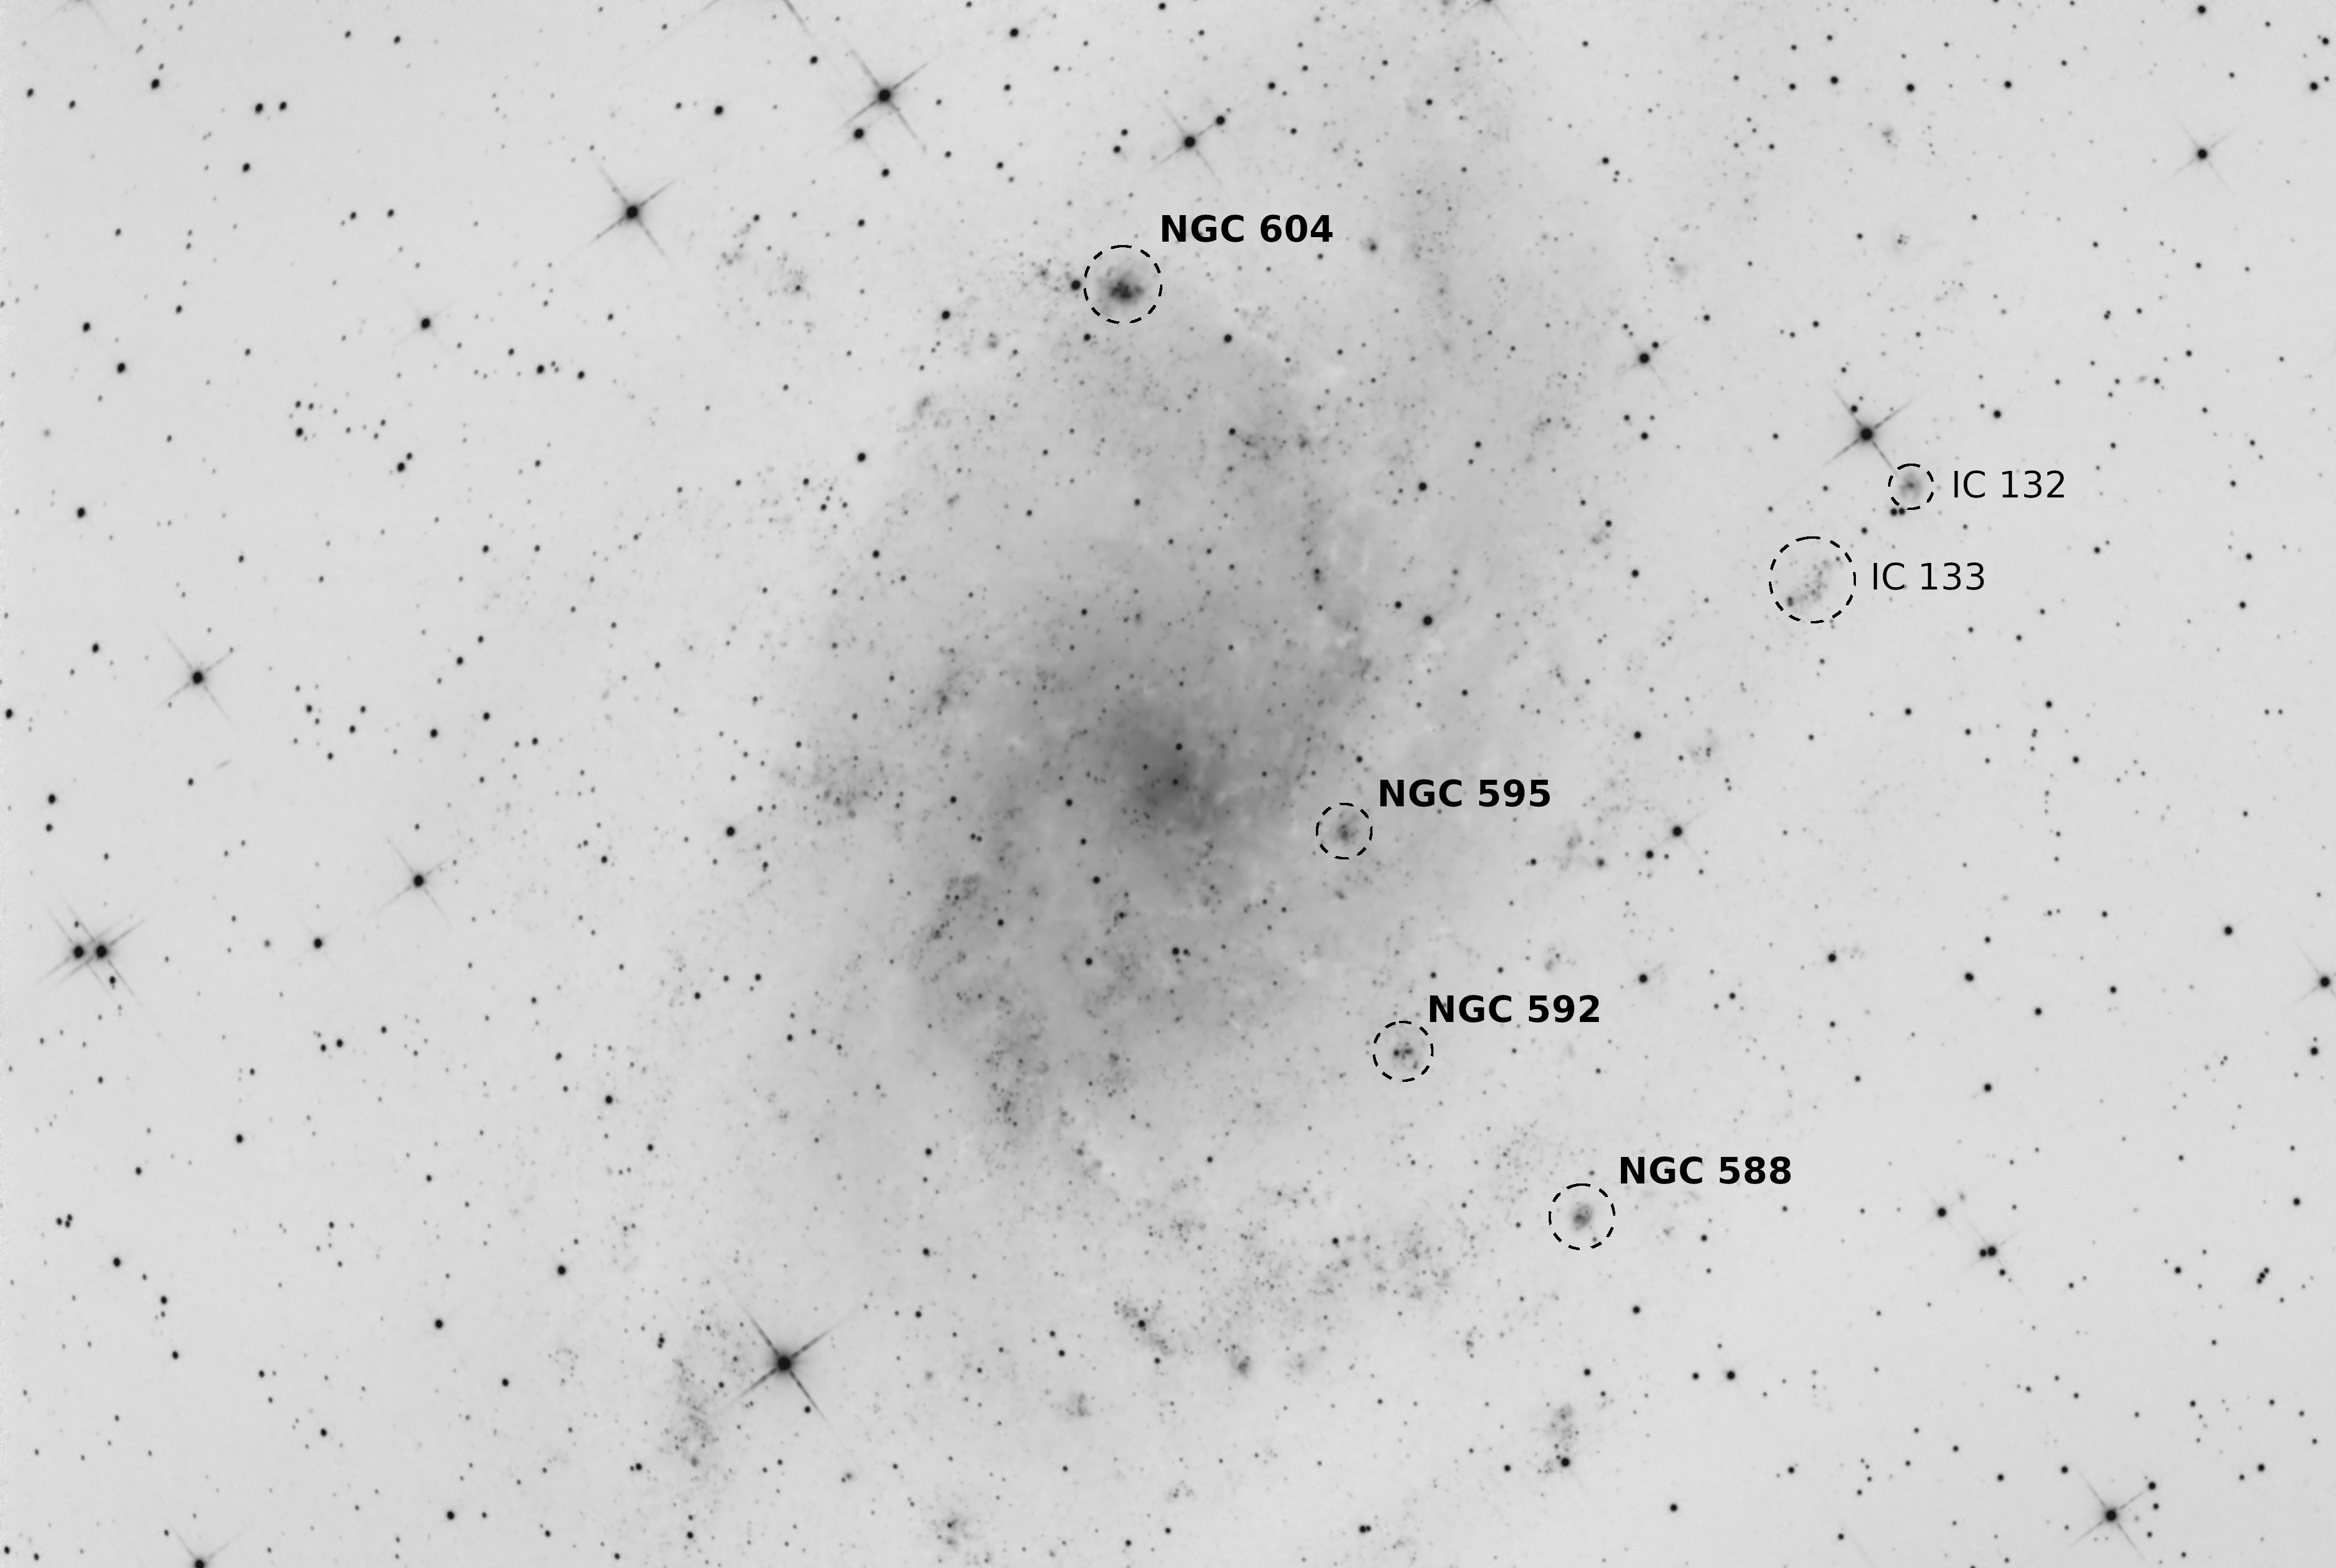 Skyguide 2022-3 - Messier 33 (labeled)